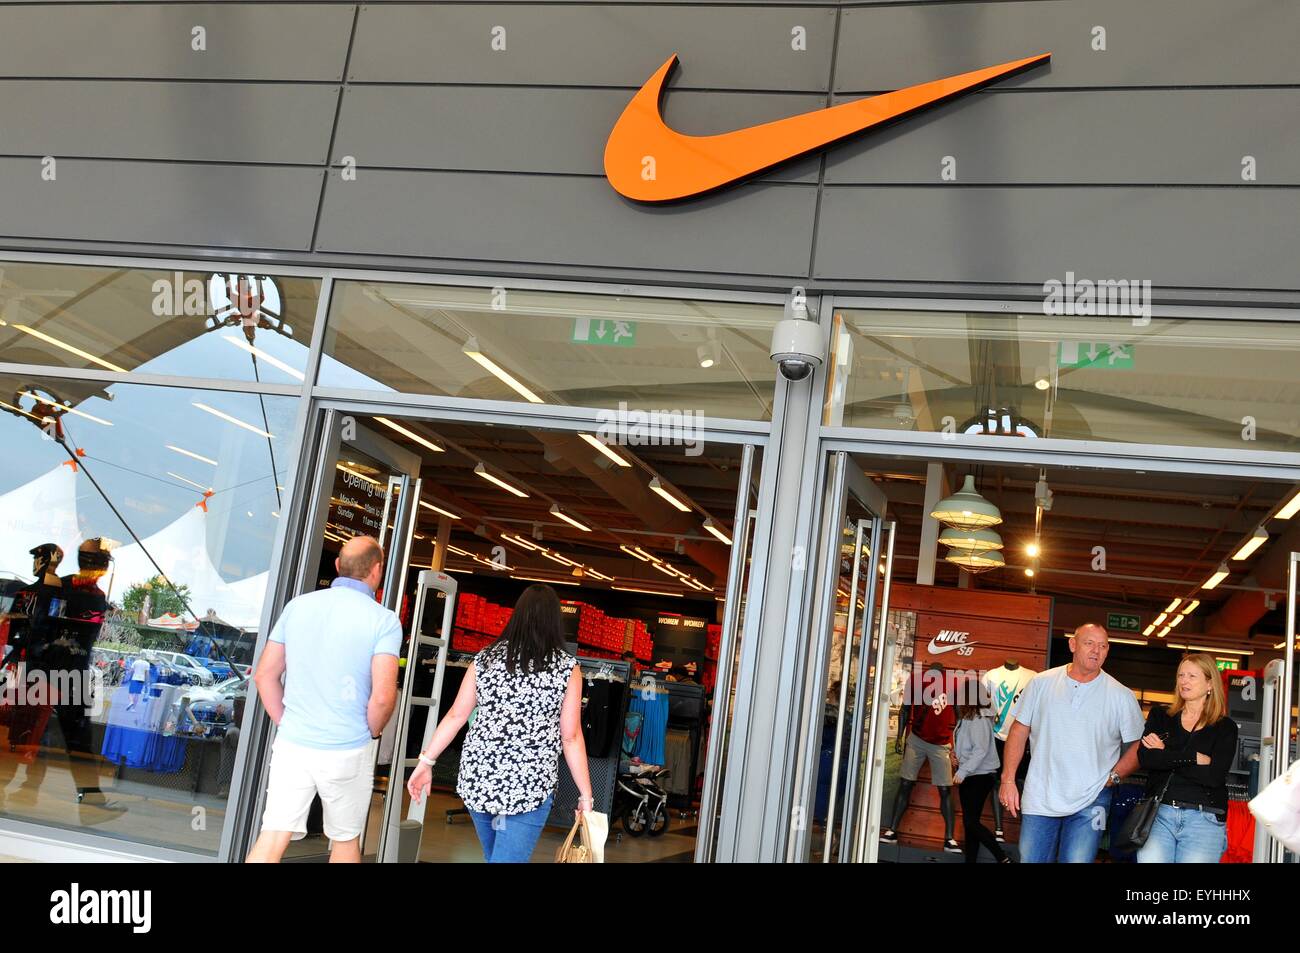 Page 2 - Nike Outlet Store High Resolution Stock Photography and Images -  Alamy